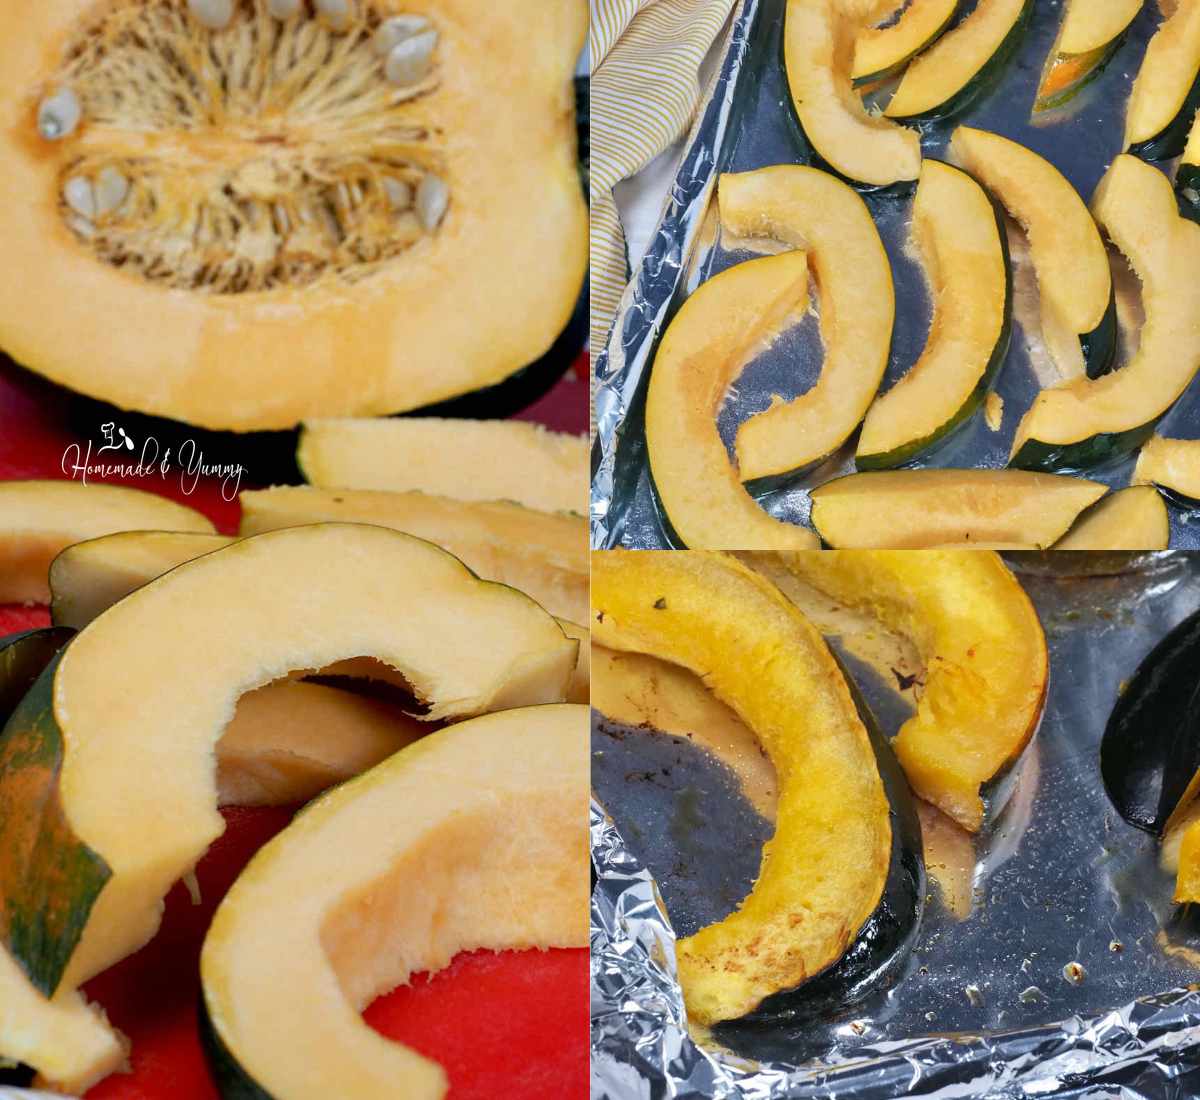 Steps 1 to 3 on how to roast slices of squash.